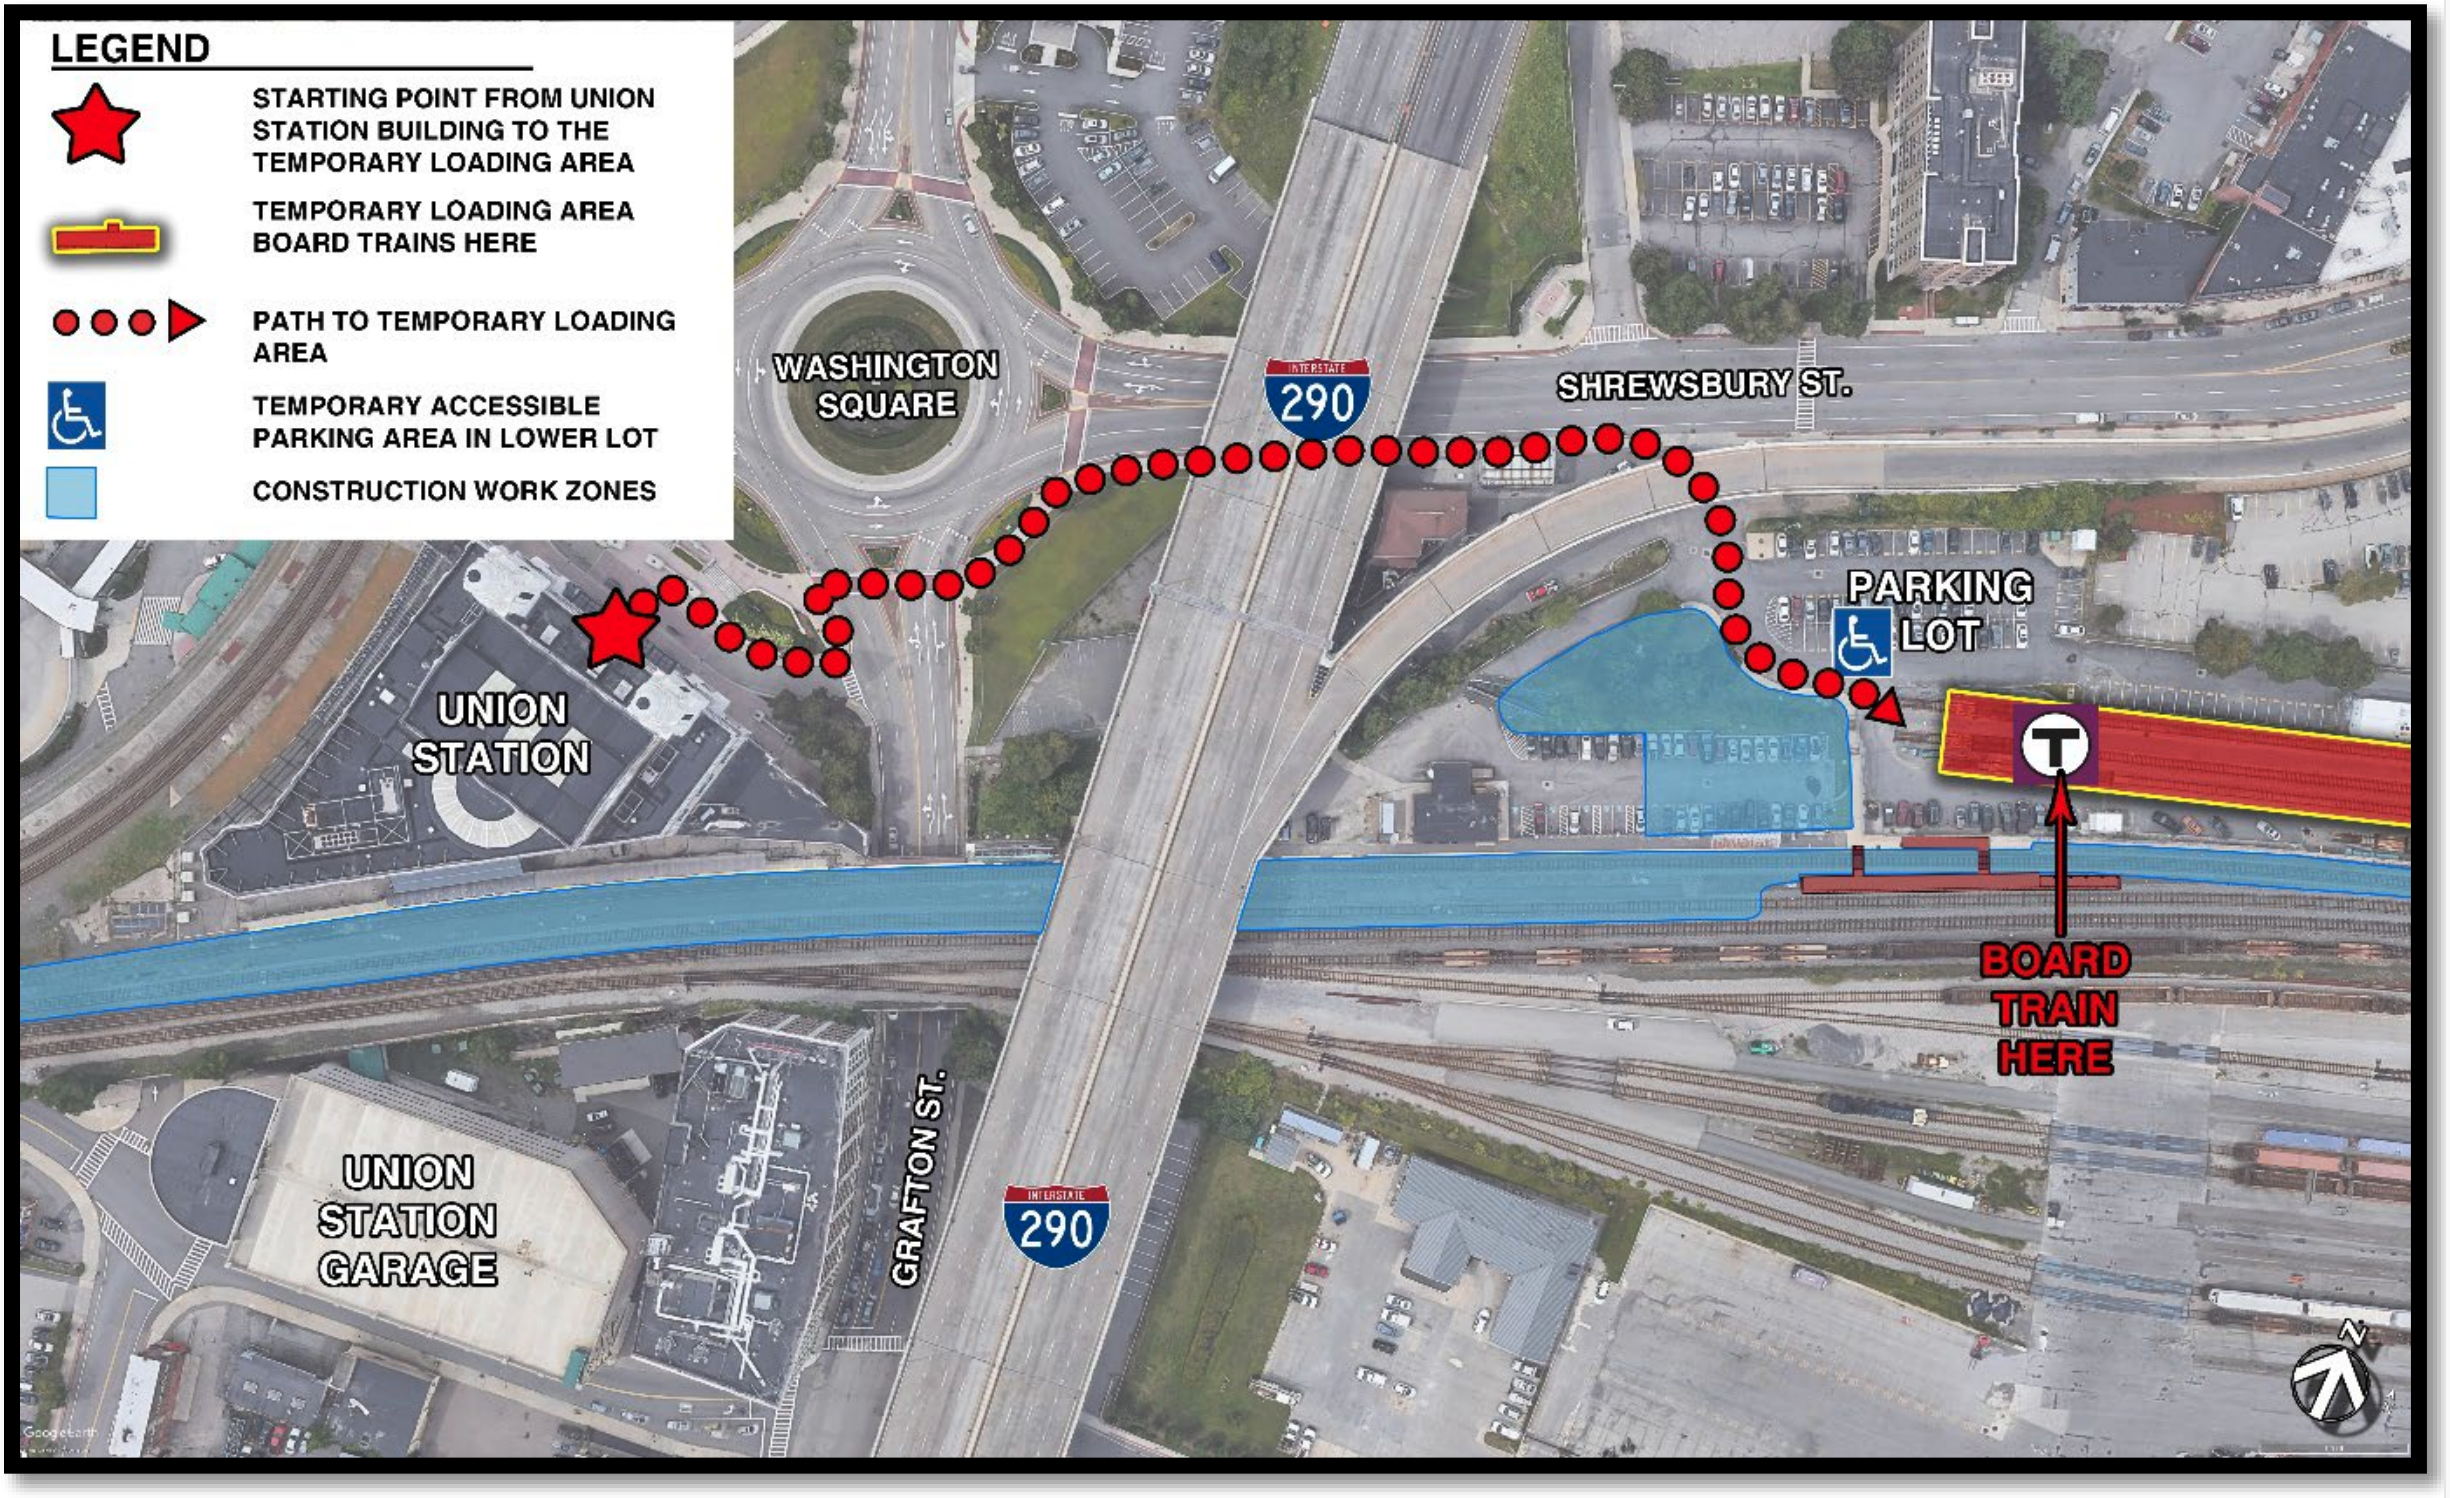 Overhead map of the Worcester Union Station area with the temporary pedestrian path from the front of the station to the temporary boarding area marked in red